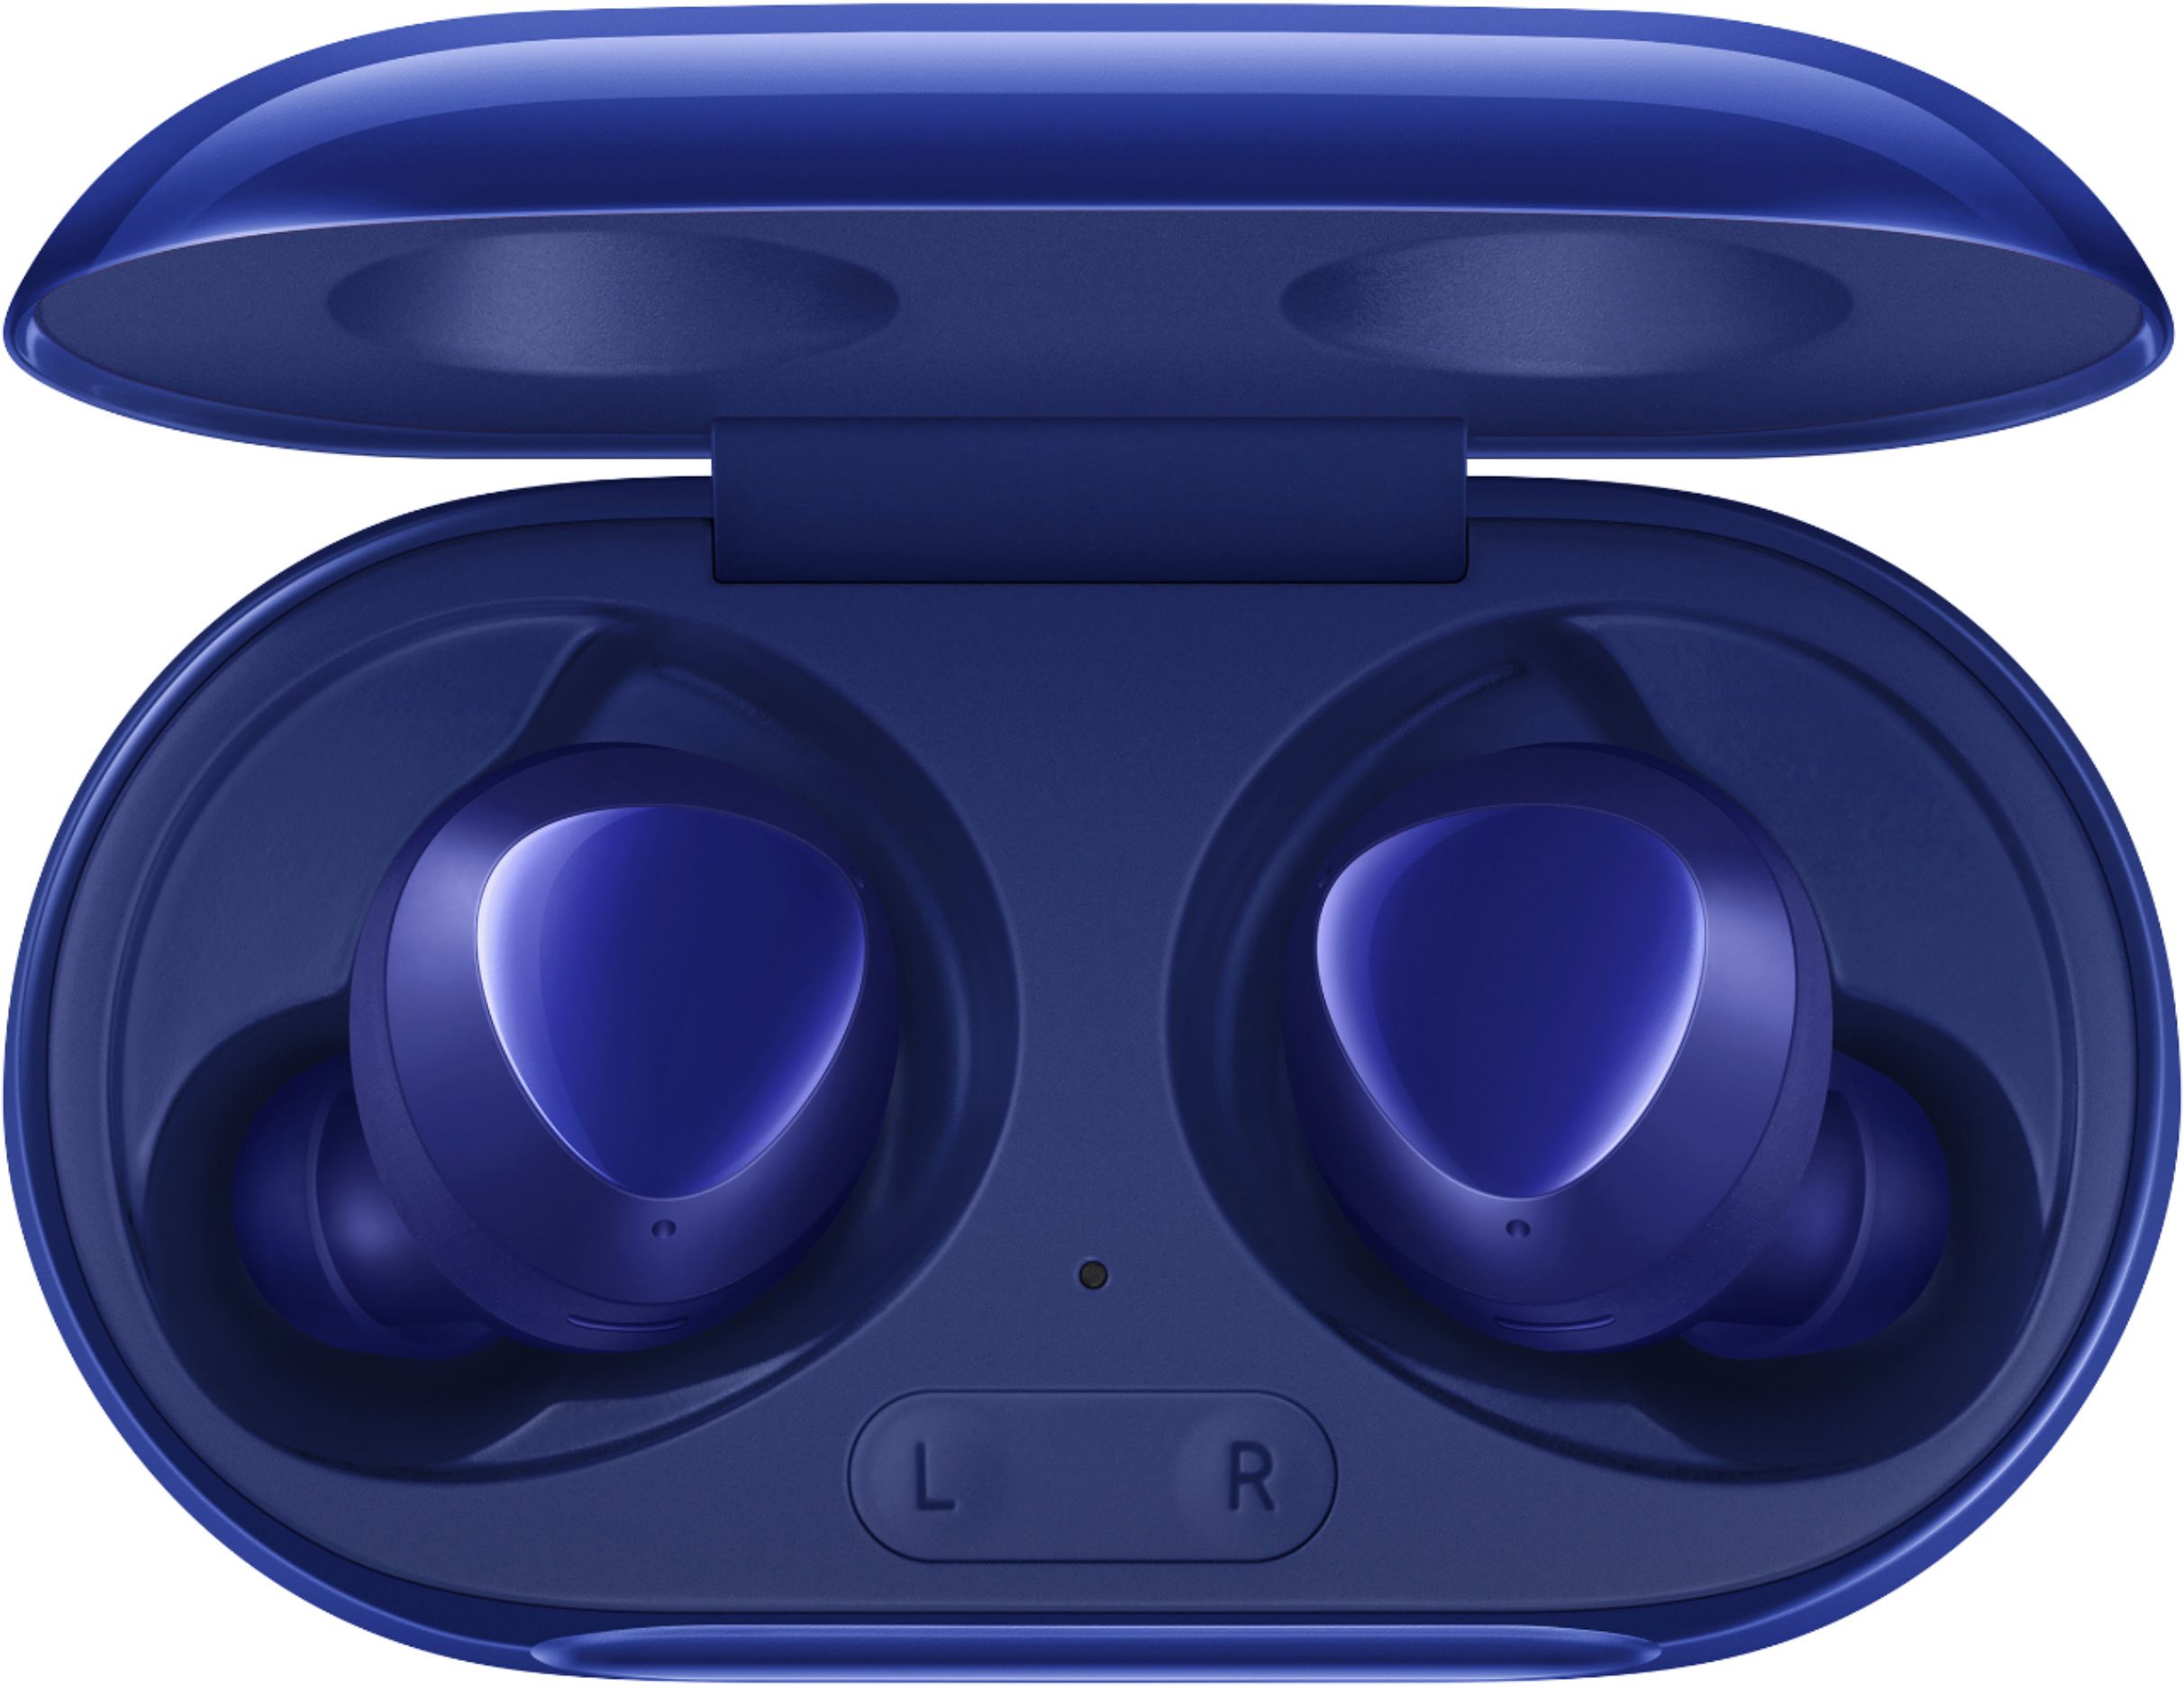 Questions and Answers: Samsung Galaxy Buds+ True Wireless Earbud ...